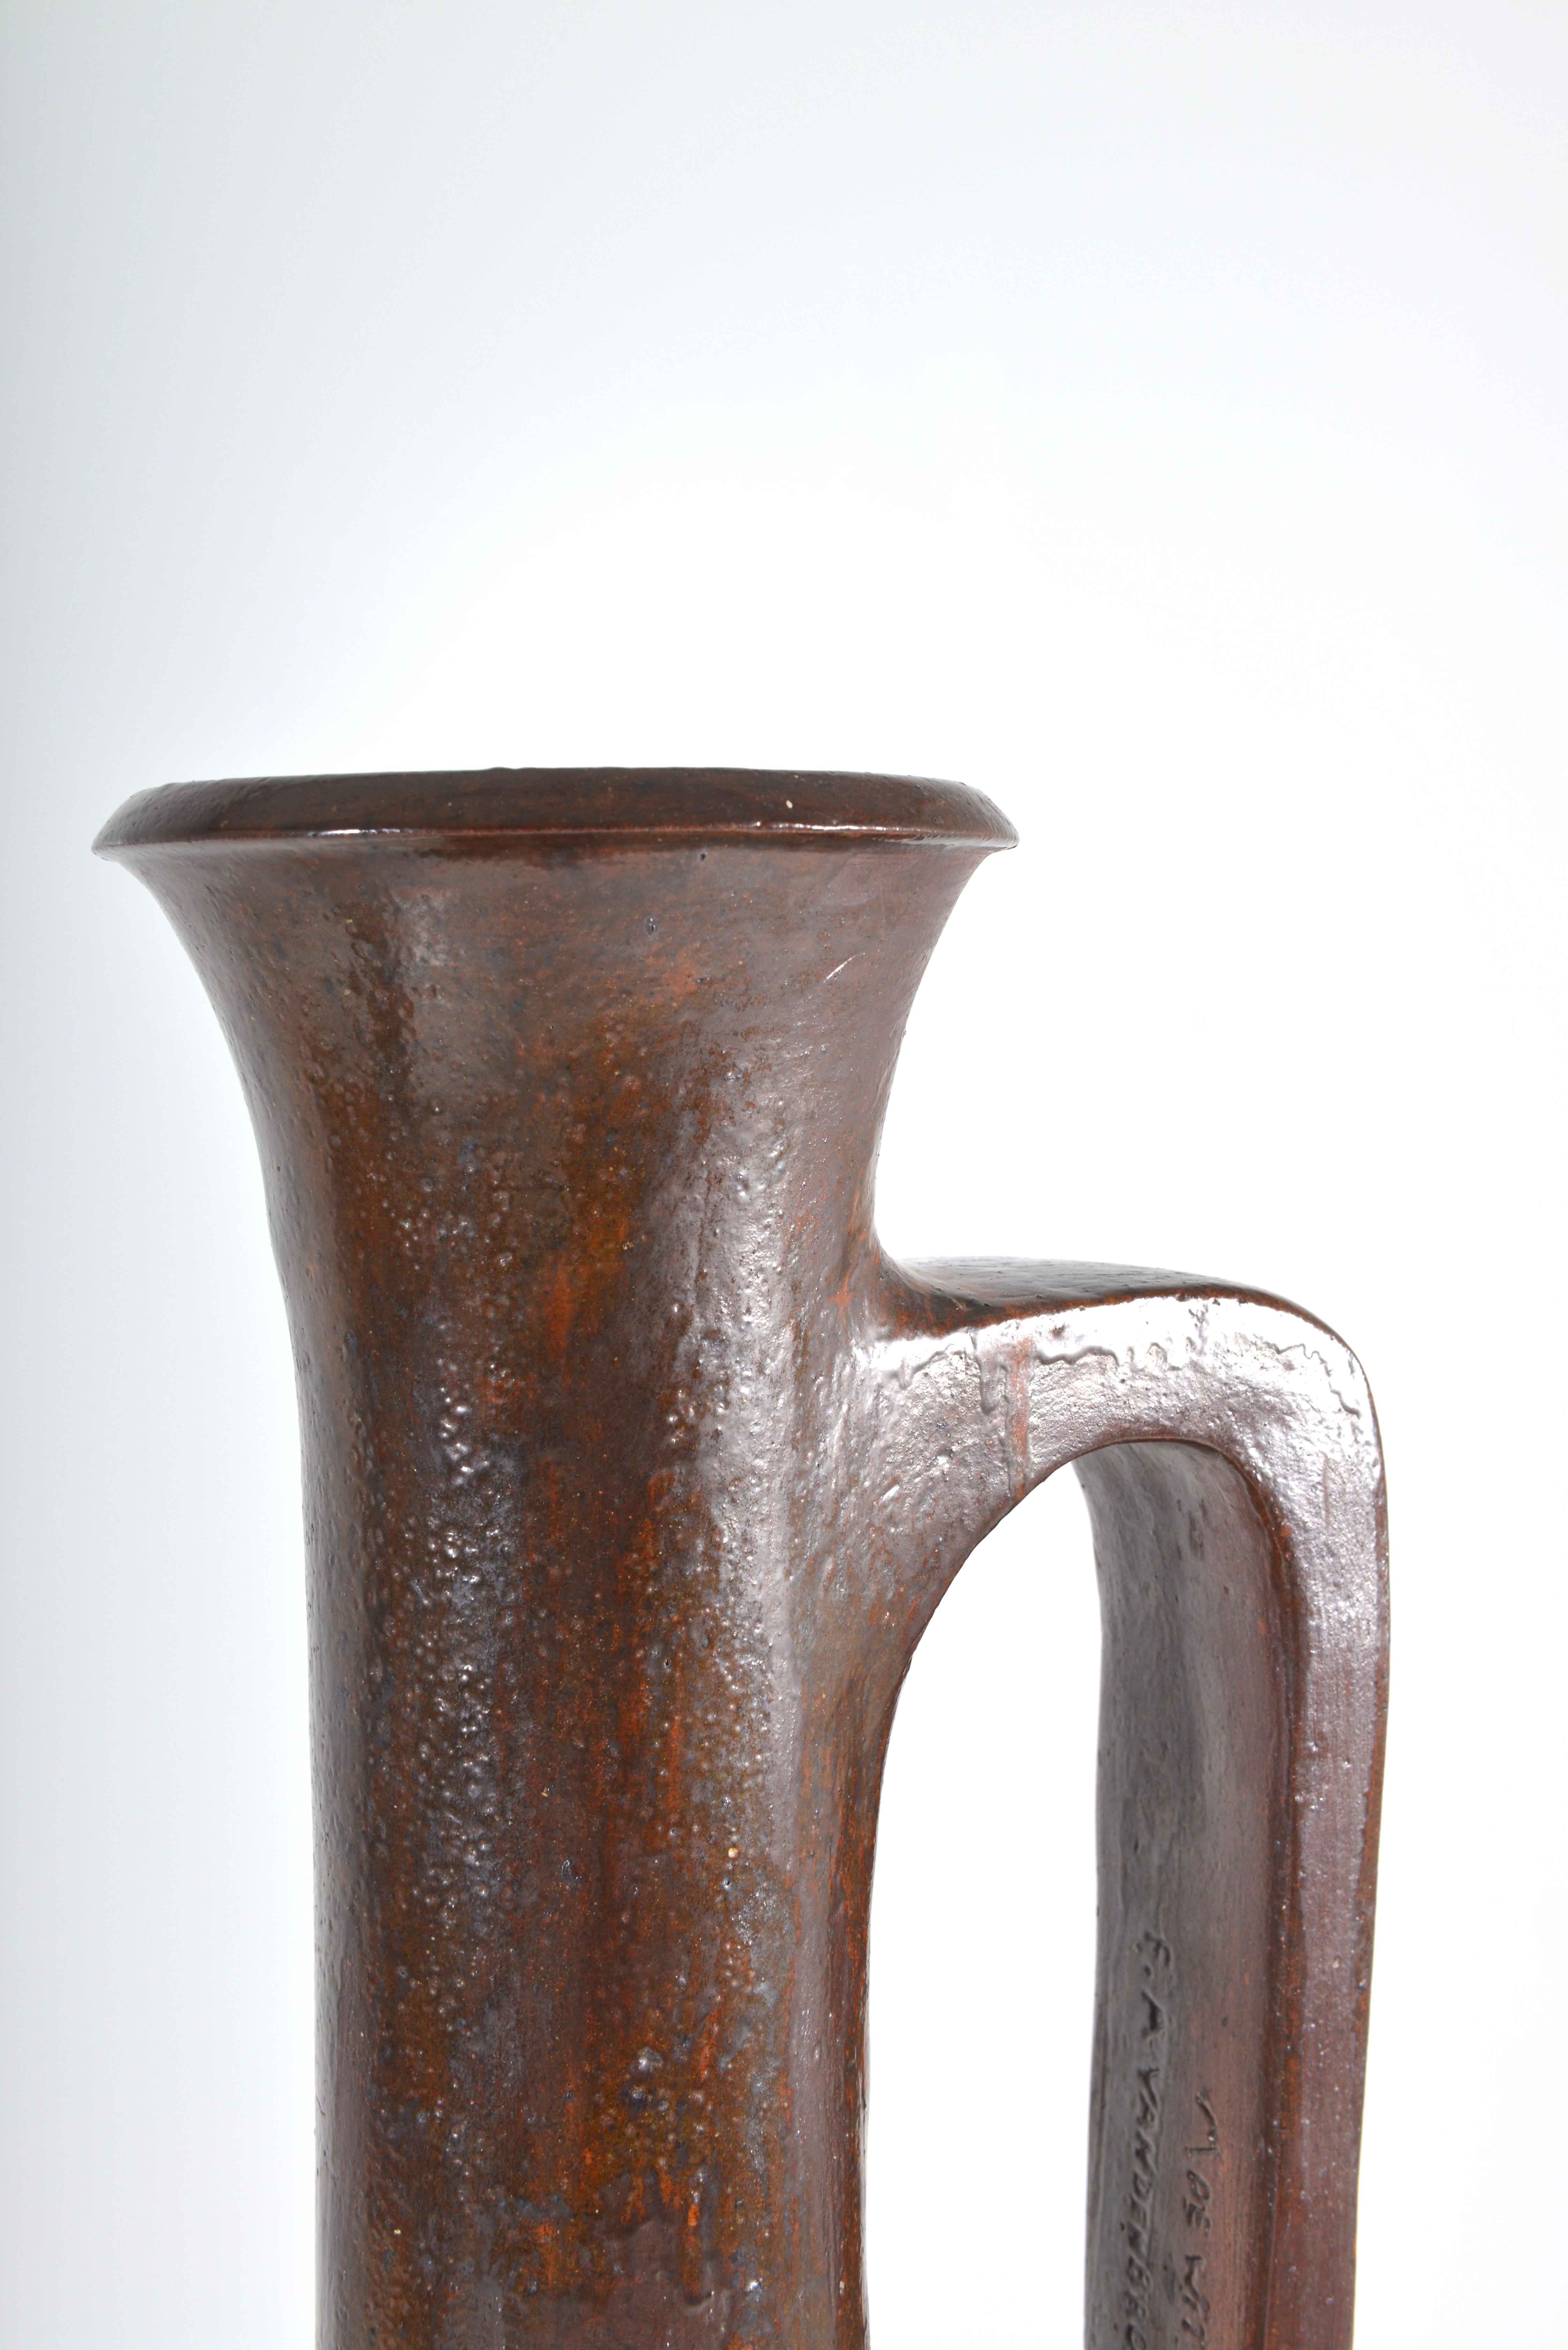 This almost life-size late 1960s vase is made of rough terracotta. It’s a very elegant and extremely tall vase. It’s a surreal updated version of the Greco-Roman tradition and color scheme. The feeling is Mediterranean and does remind of the plain